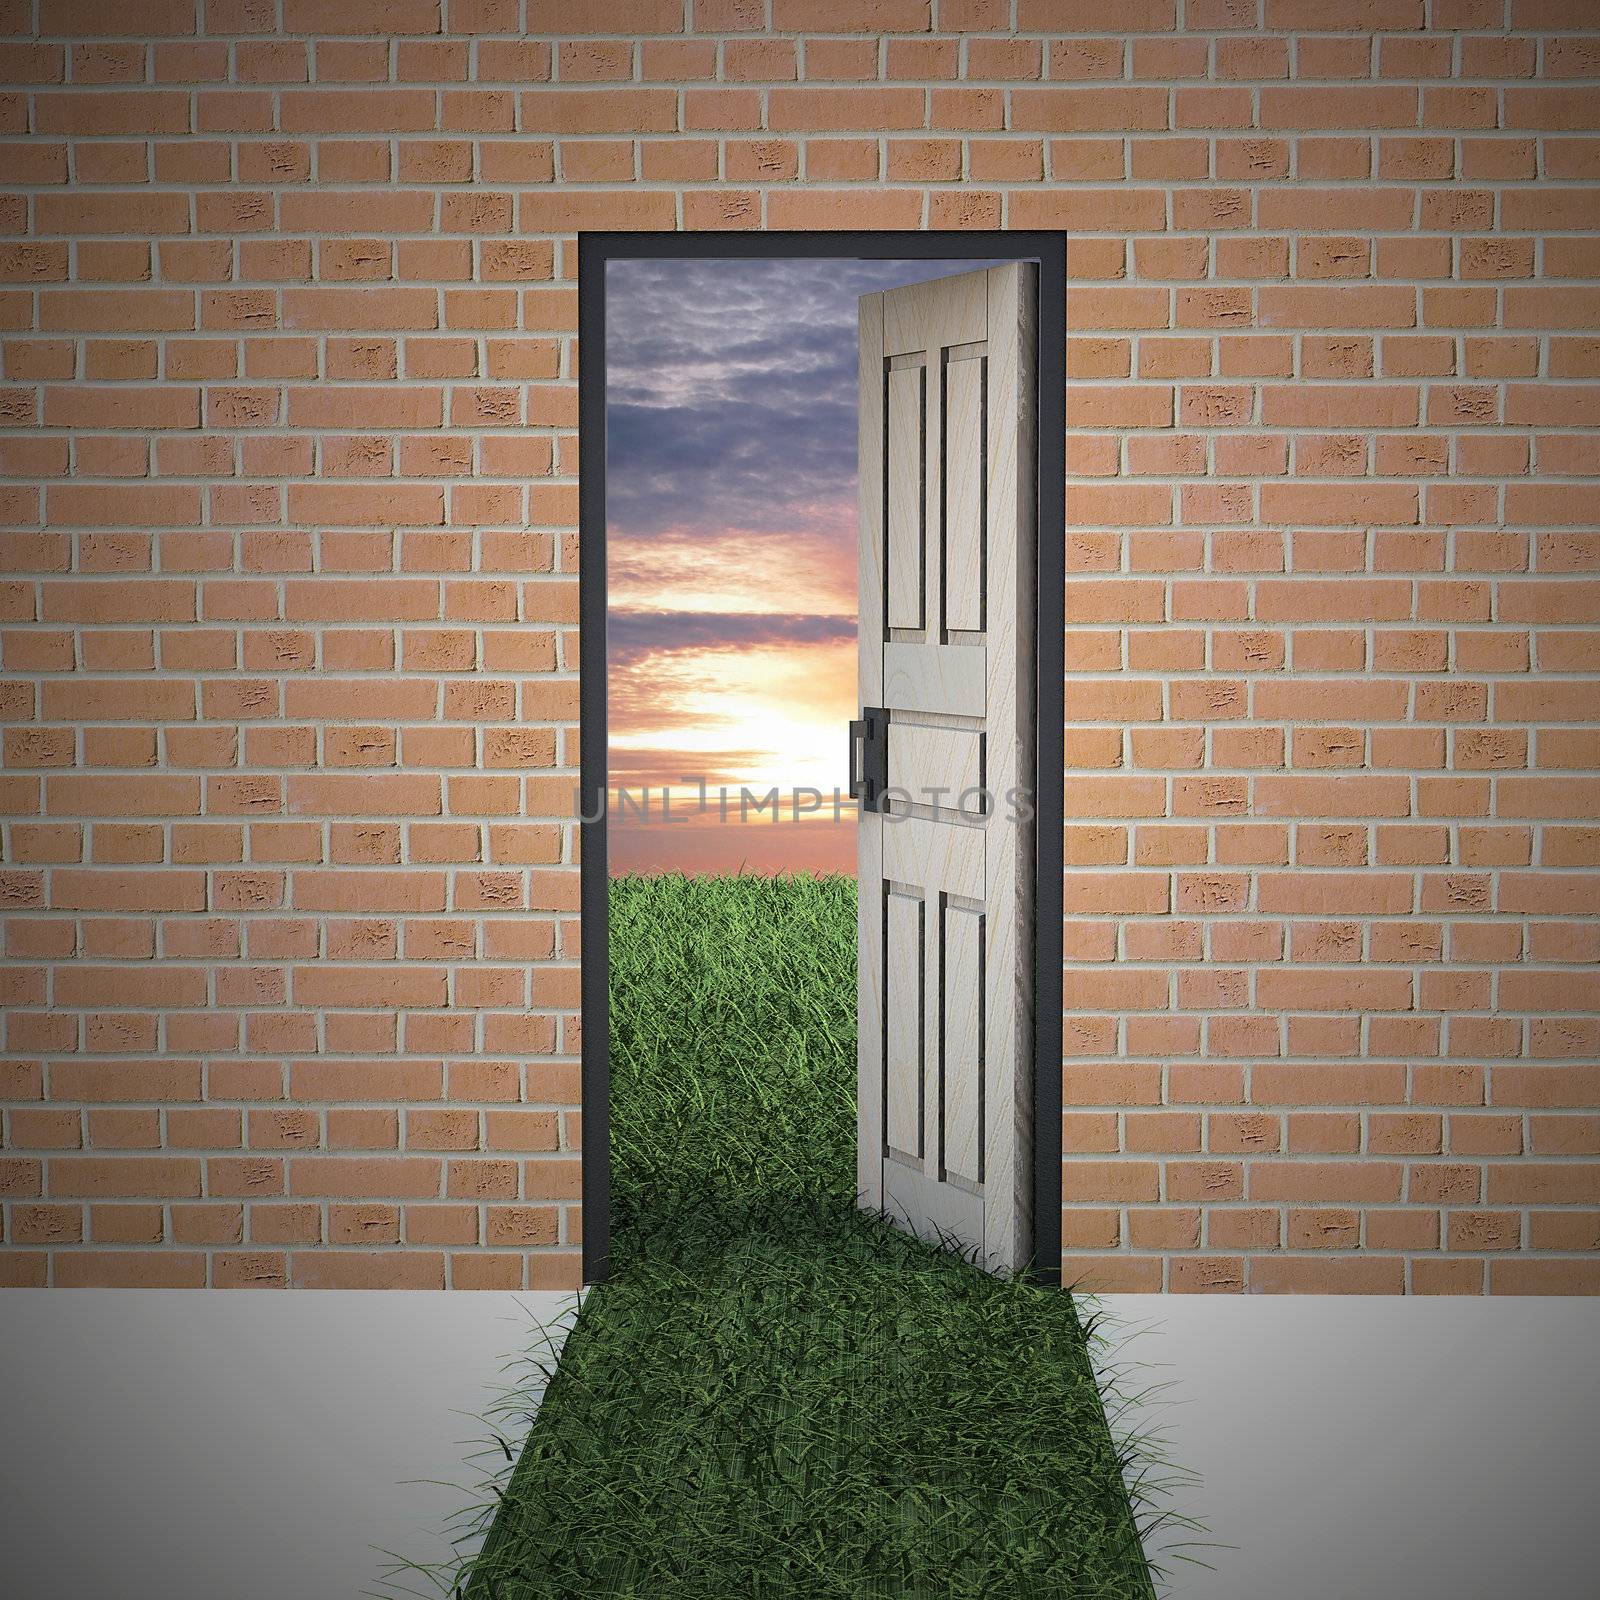 Open door to new life from brick wall. Hope, success, new life and world concepts.